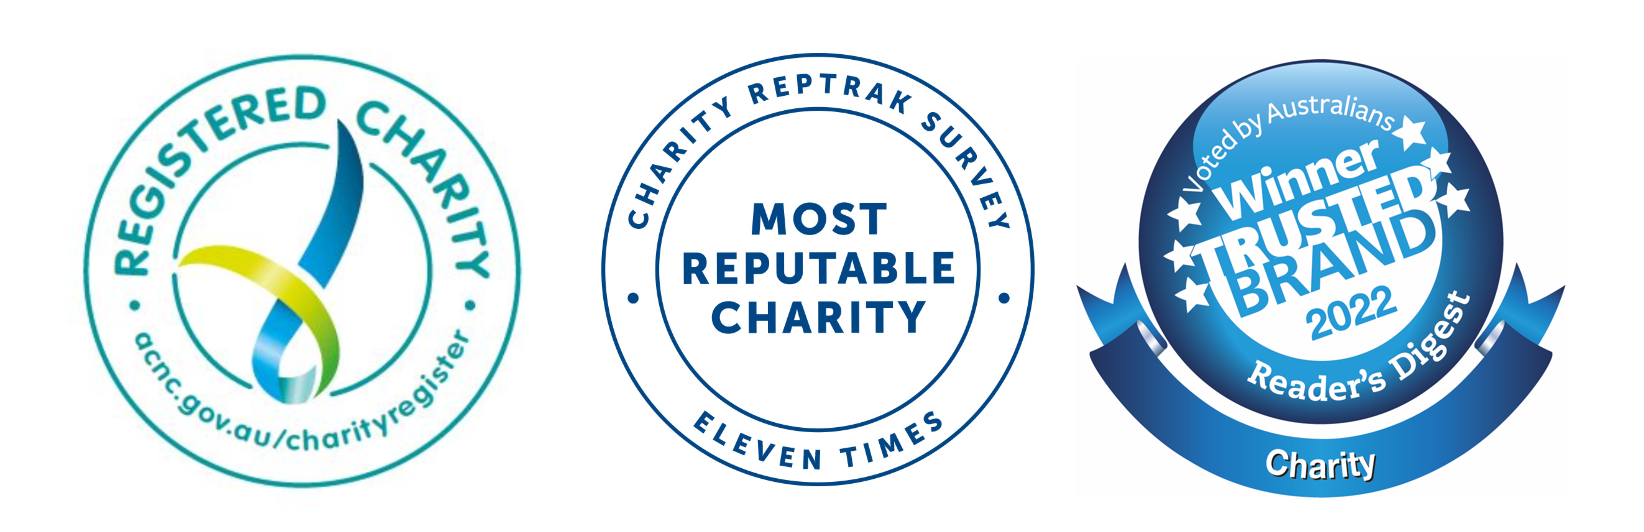 ACNC registered charity, Ten Times most reputable charity, and Readers Digest 2021 trusted brand winner.